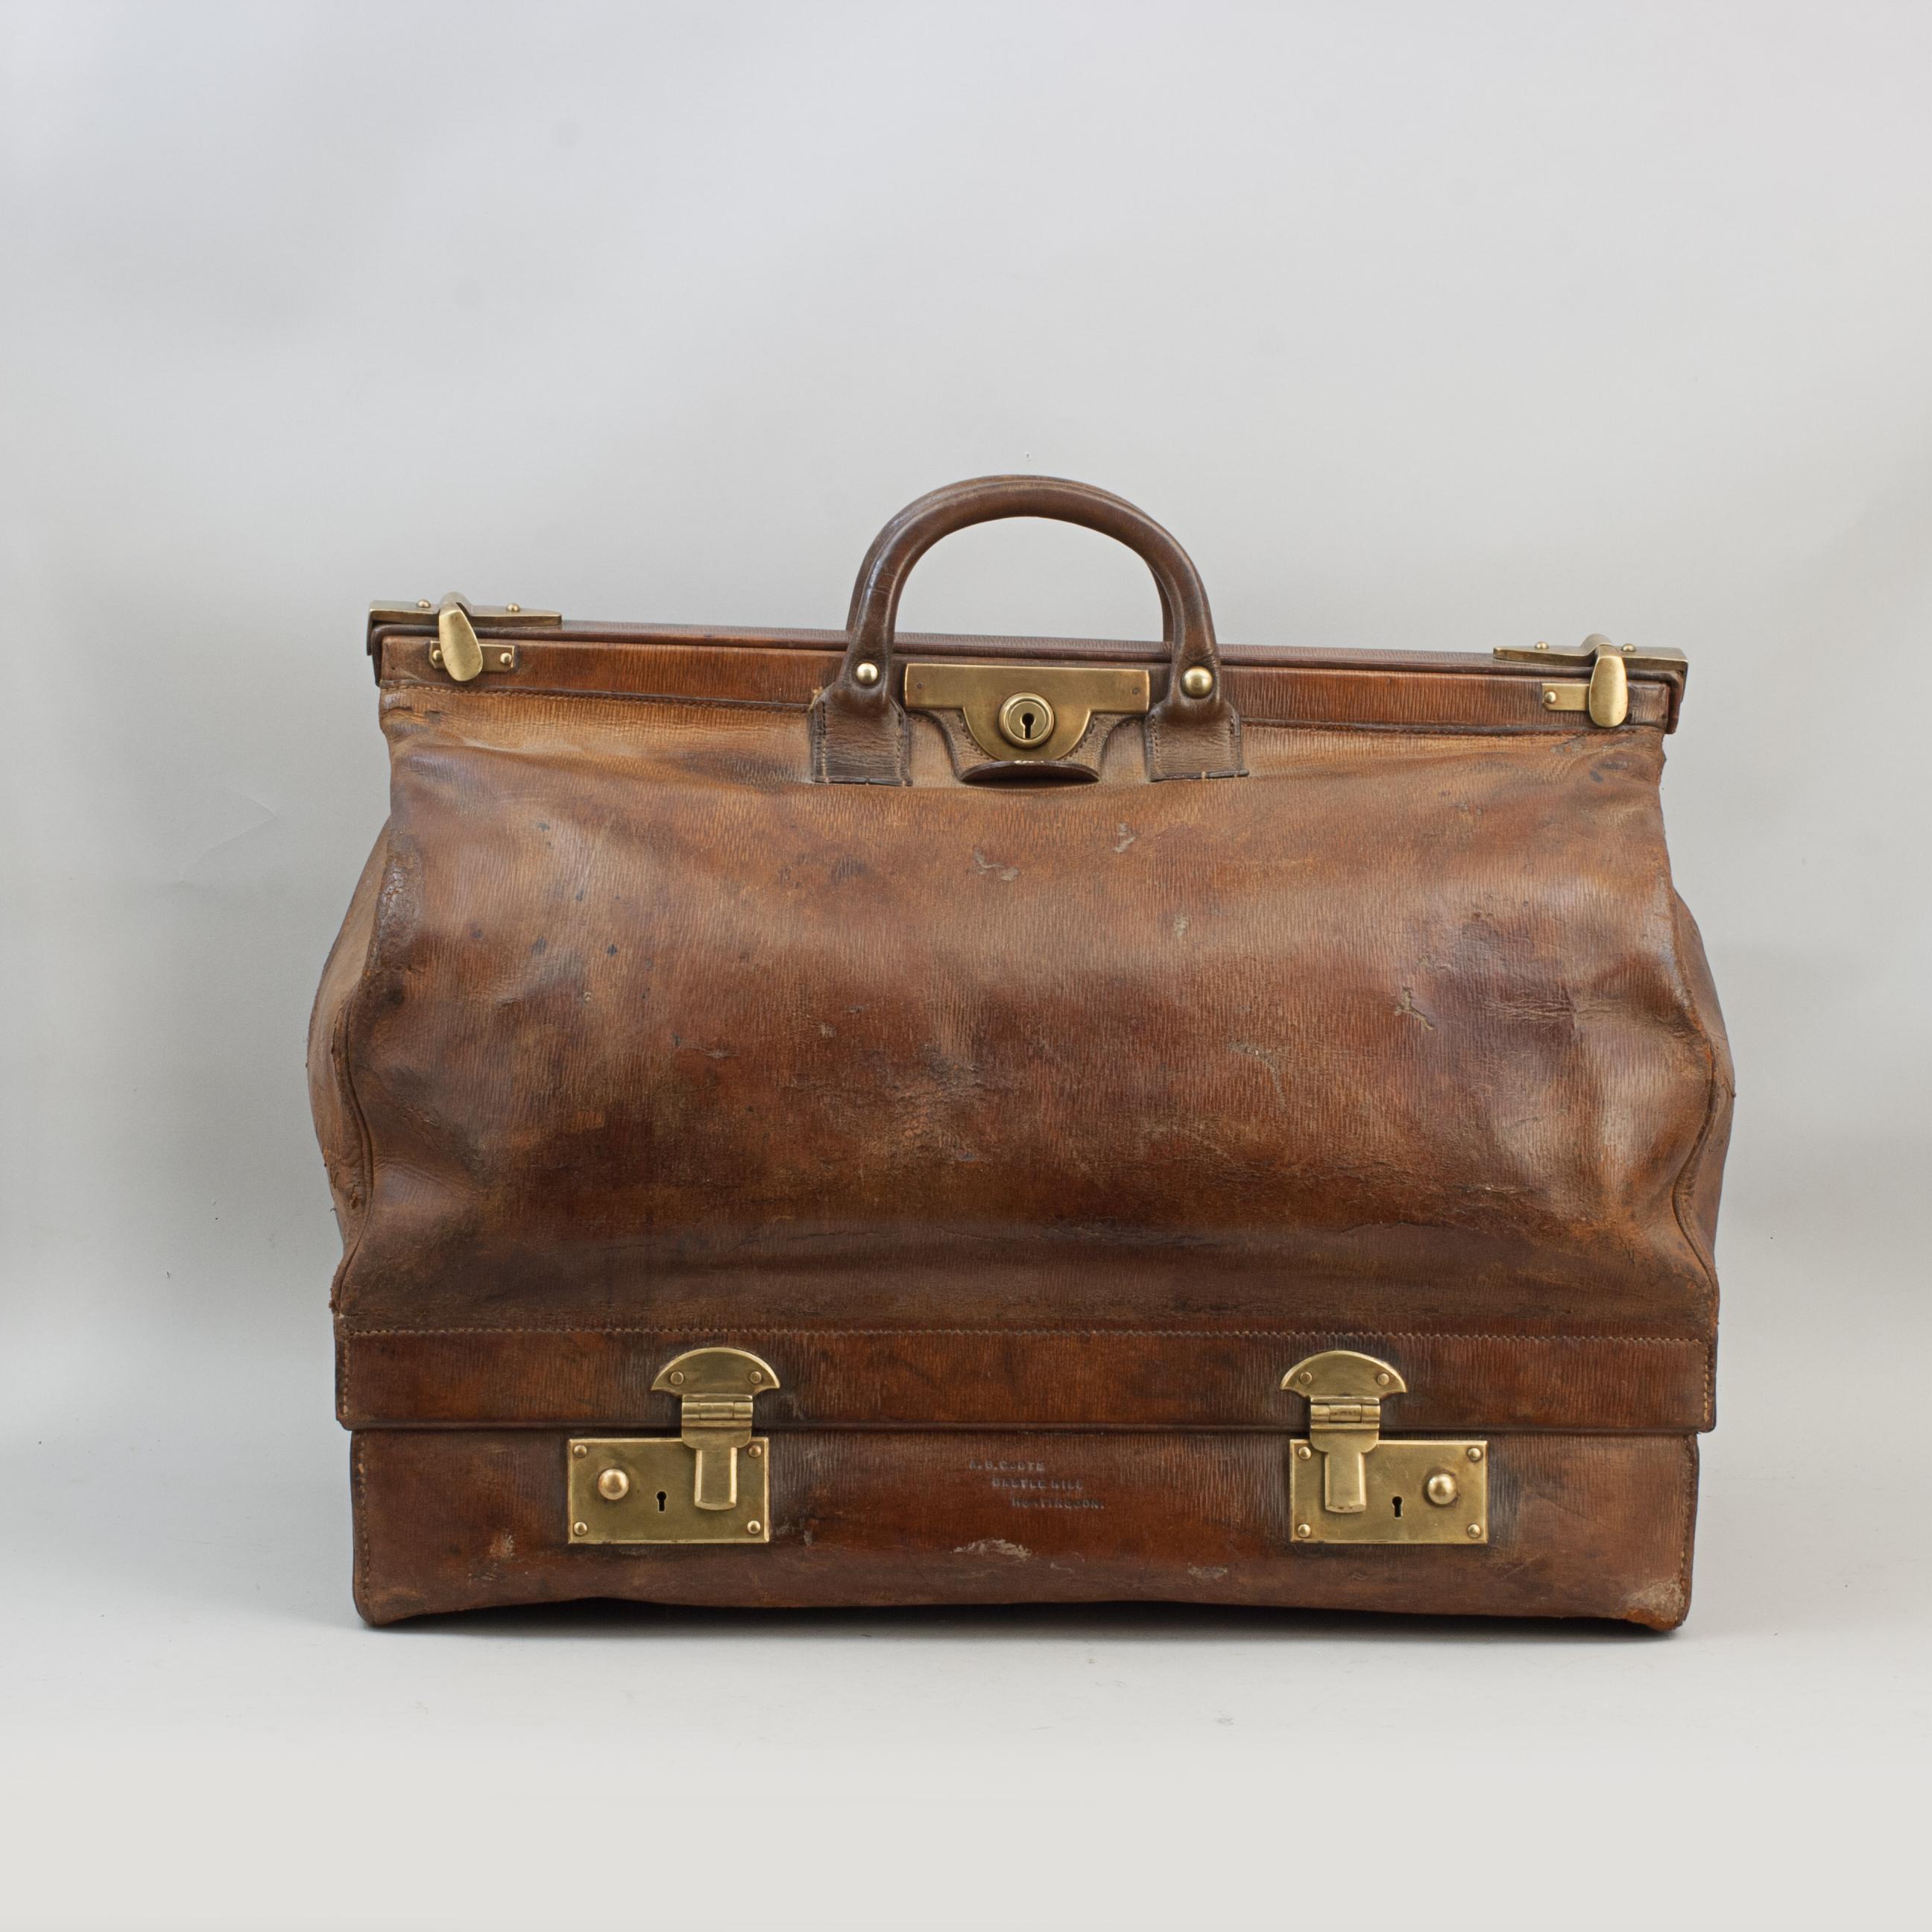 Unusual Antique Leather Gladstone Bag.
A fantastic leather Gladstone bag of unusual design with a separate suitcase compartment. The vintage holdall is stamped 'Hill Maker Newmarket' on the edge of the bag and 'H.W. Hill Newmarket' on the leather